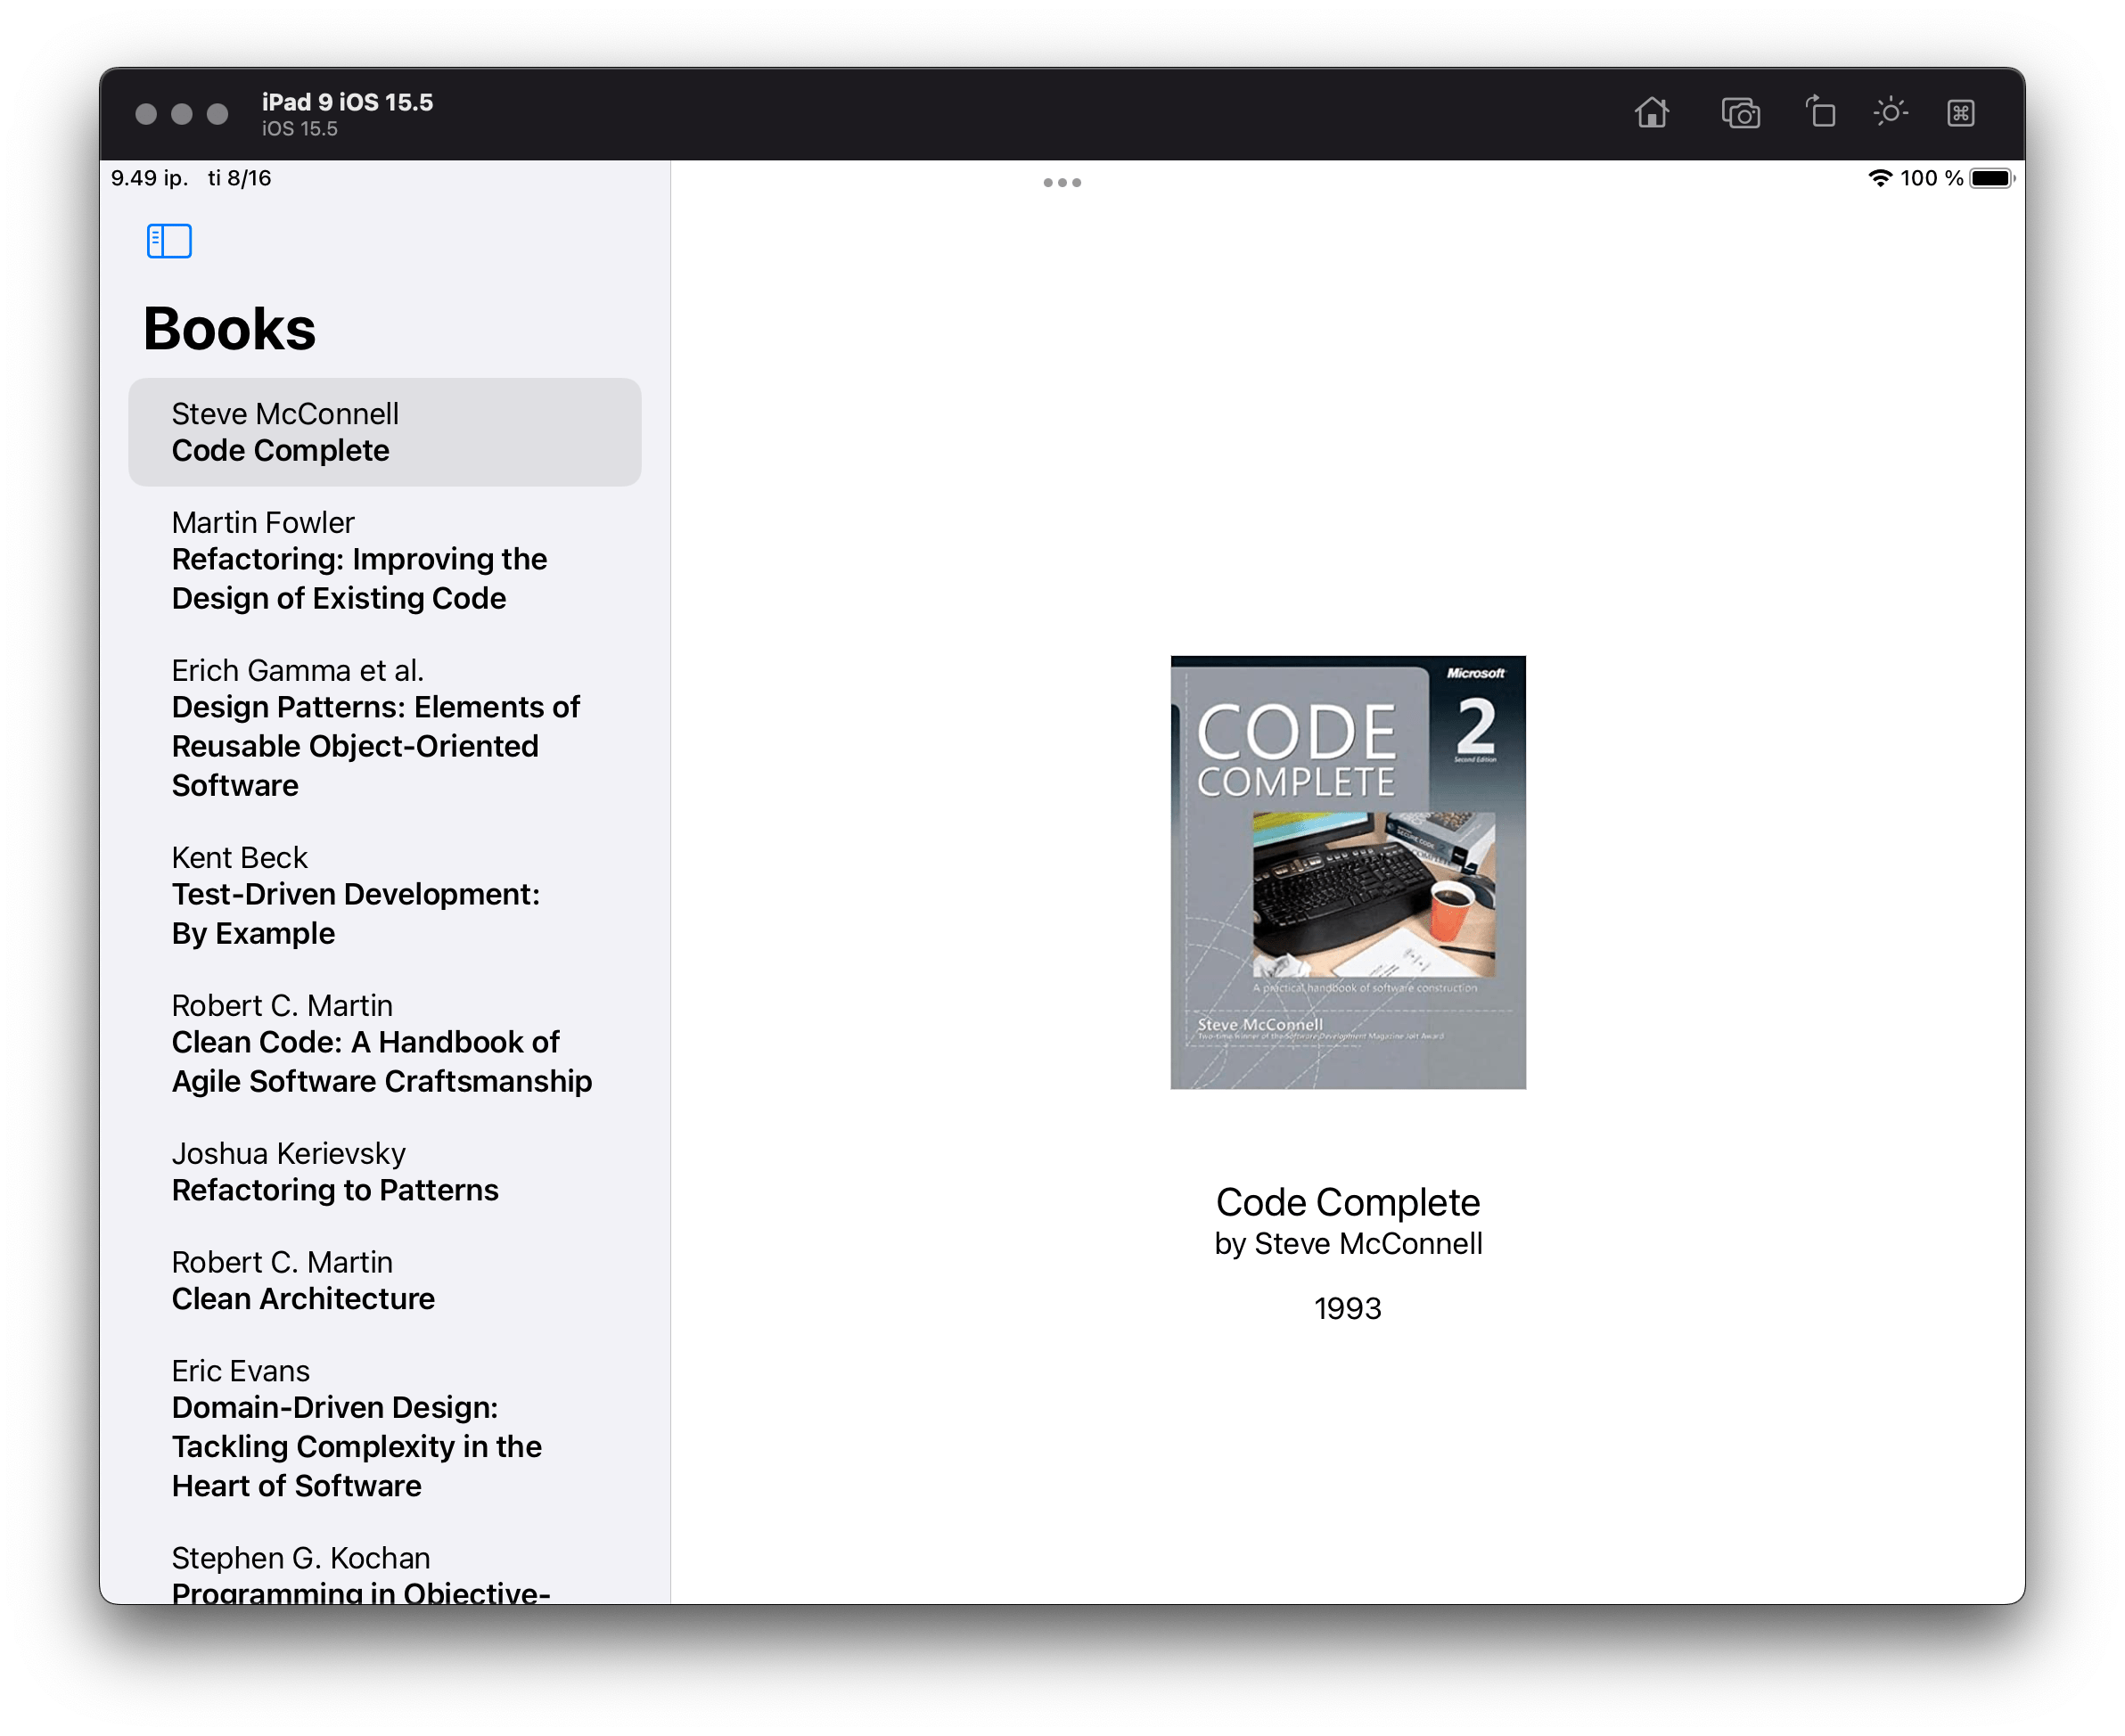 The book list with details on iPadOS